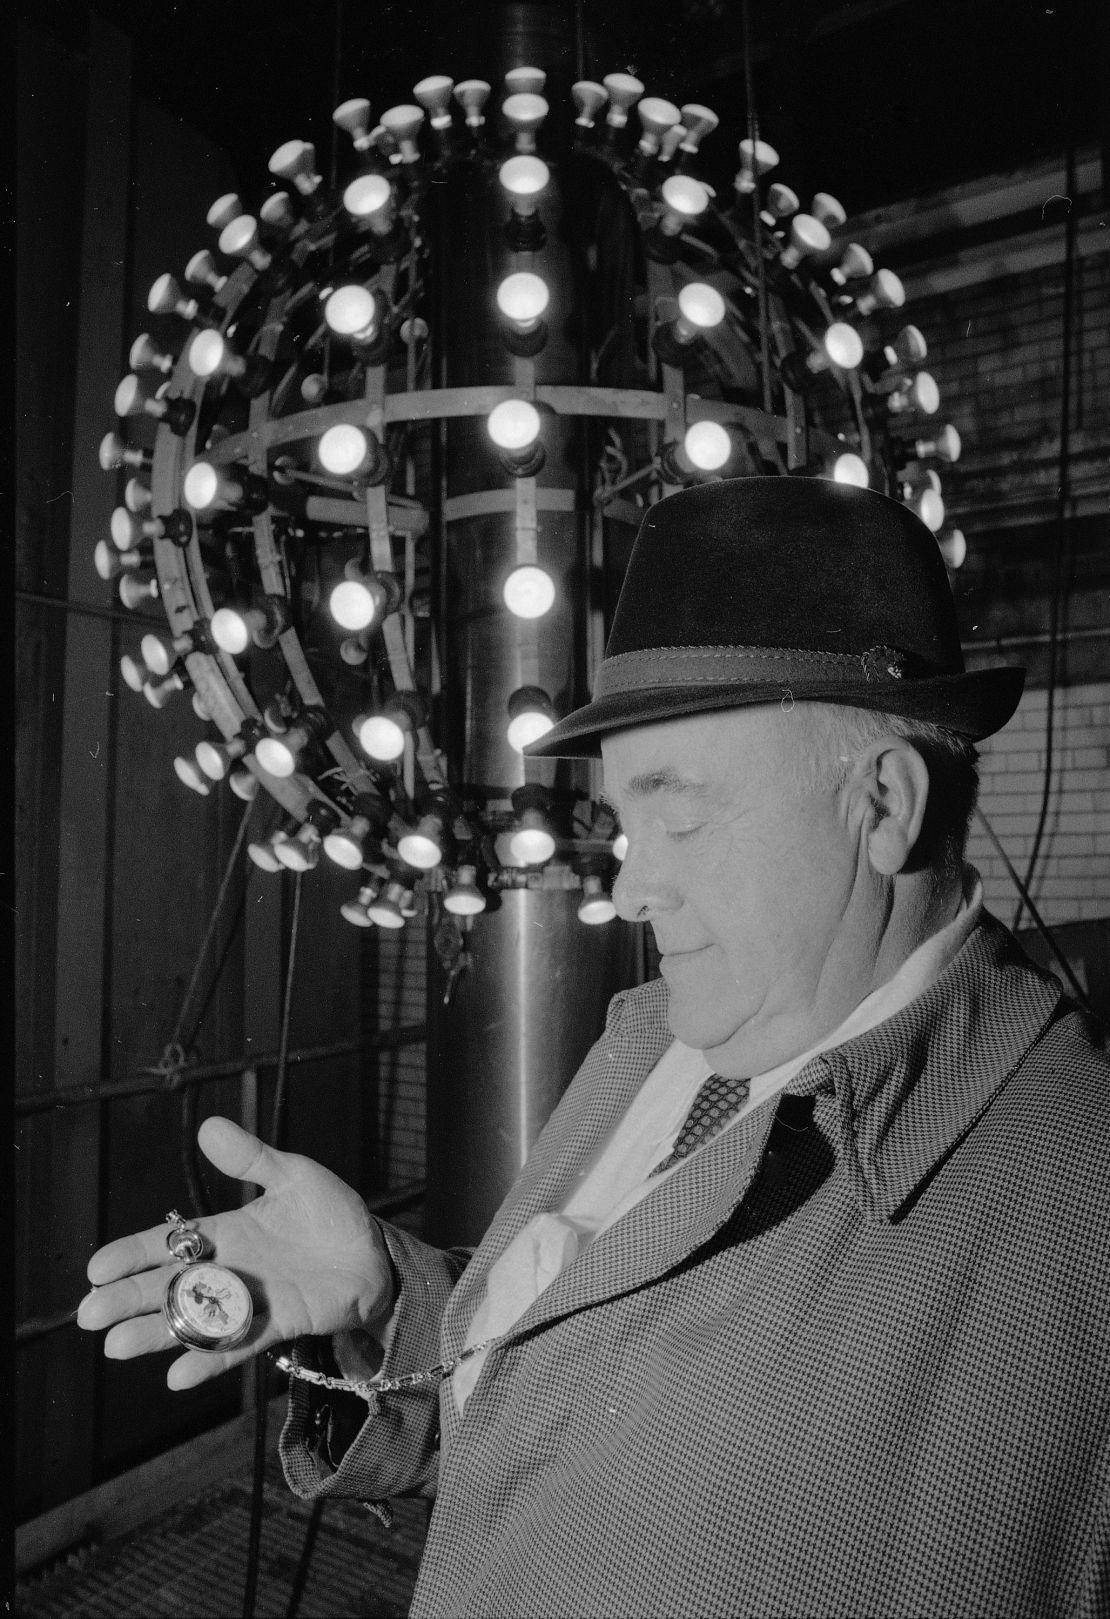 One design of the New Year's Ball was an aluminum cage outfitted with lightbulbs.